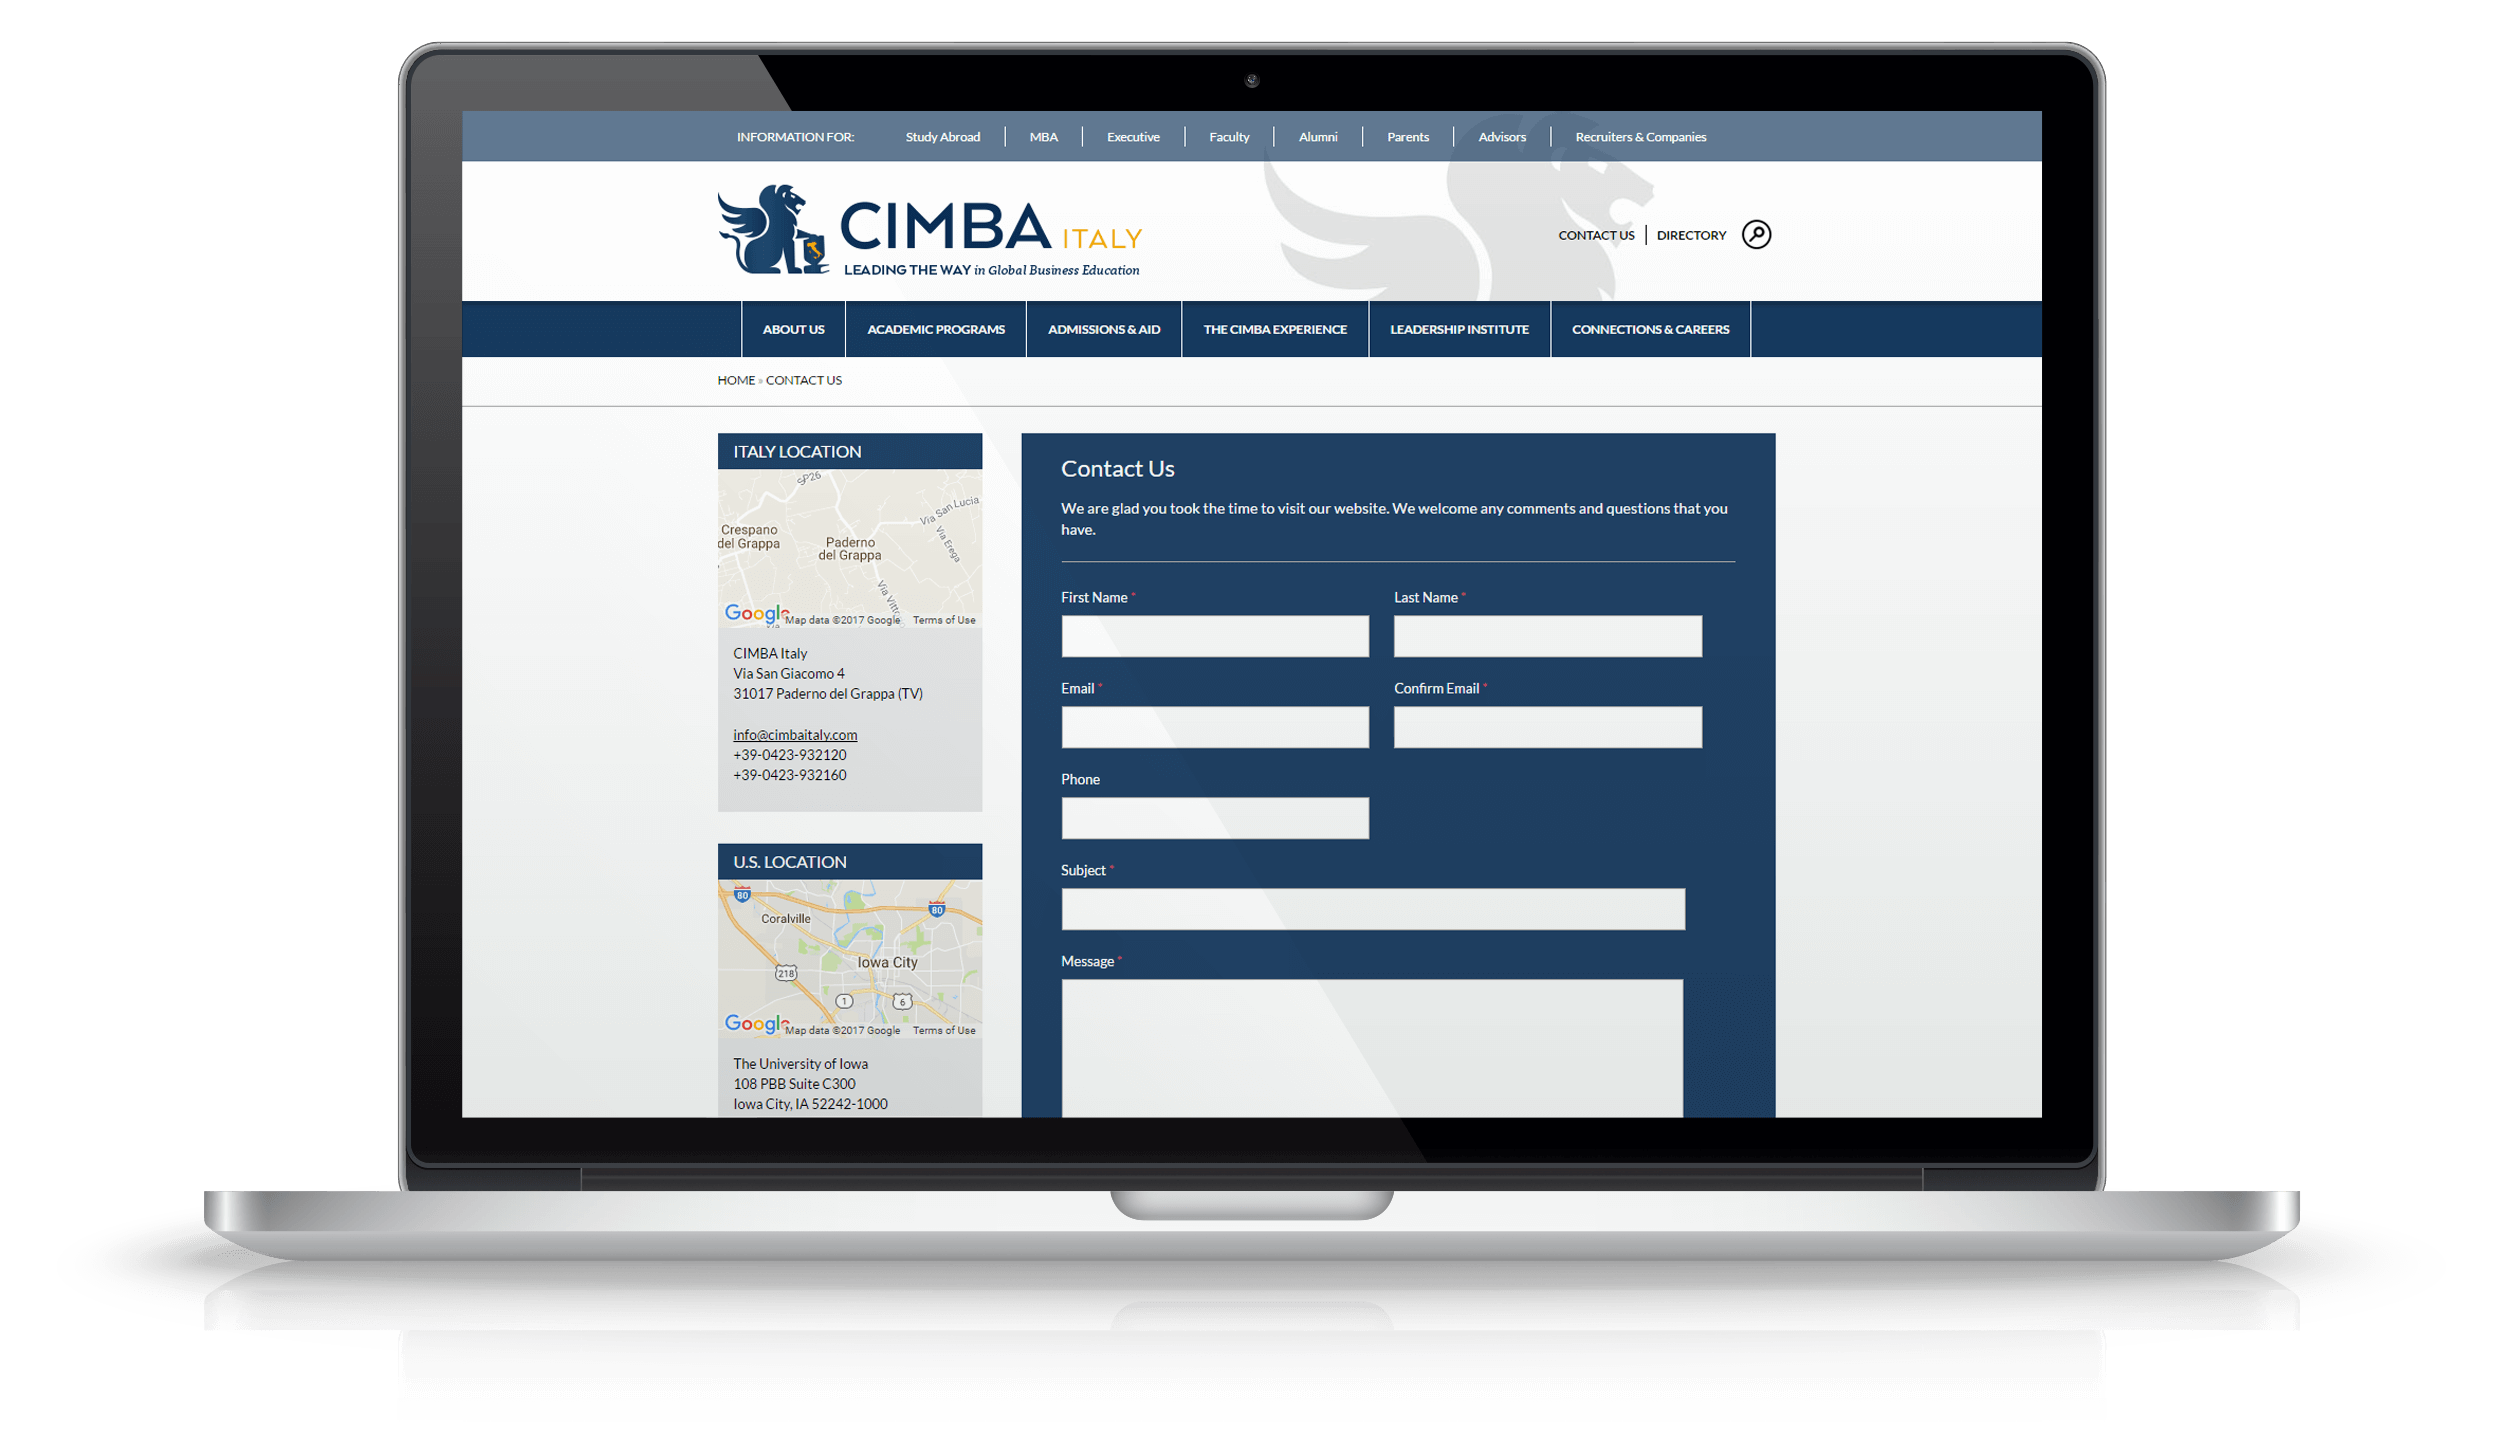 Pixelnation Project: CIMBA Italy Website - Contact Page